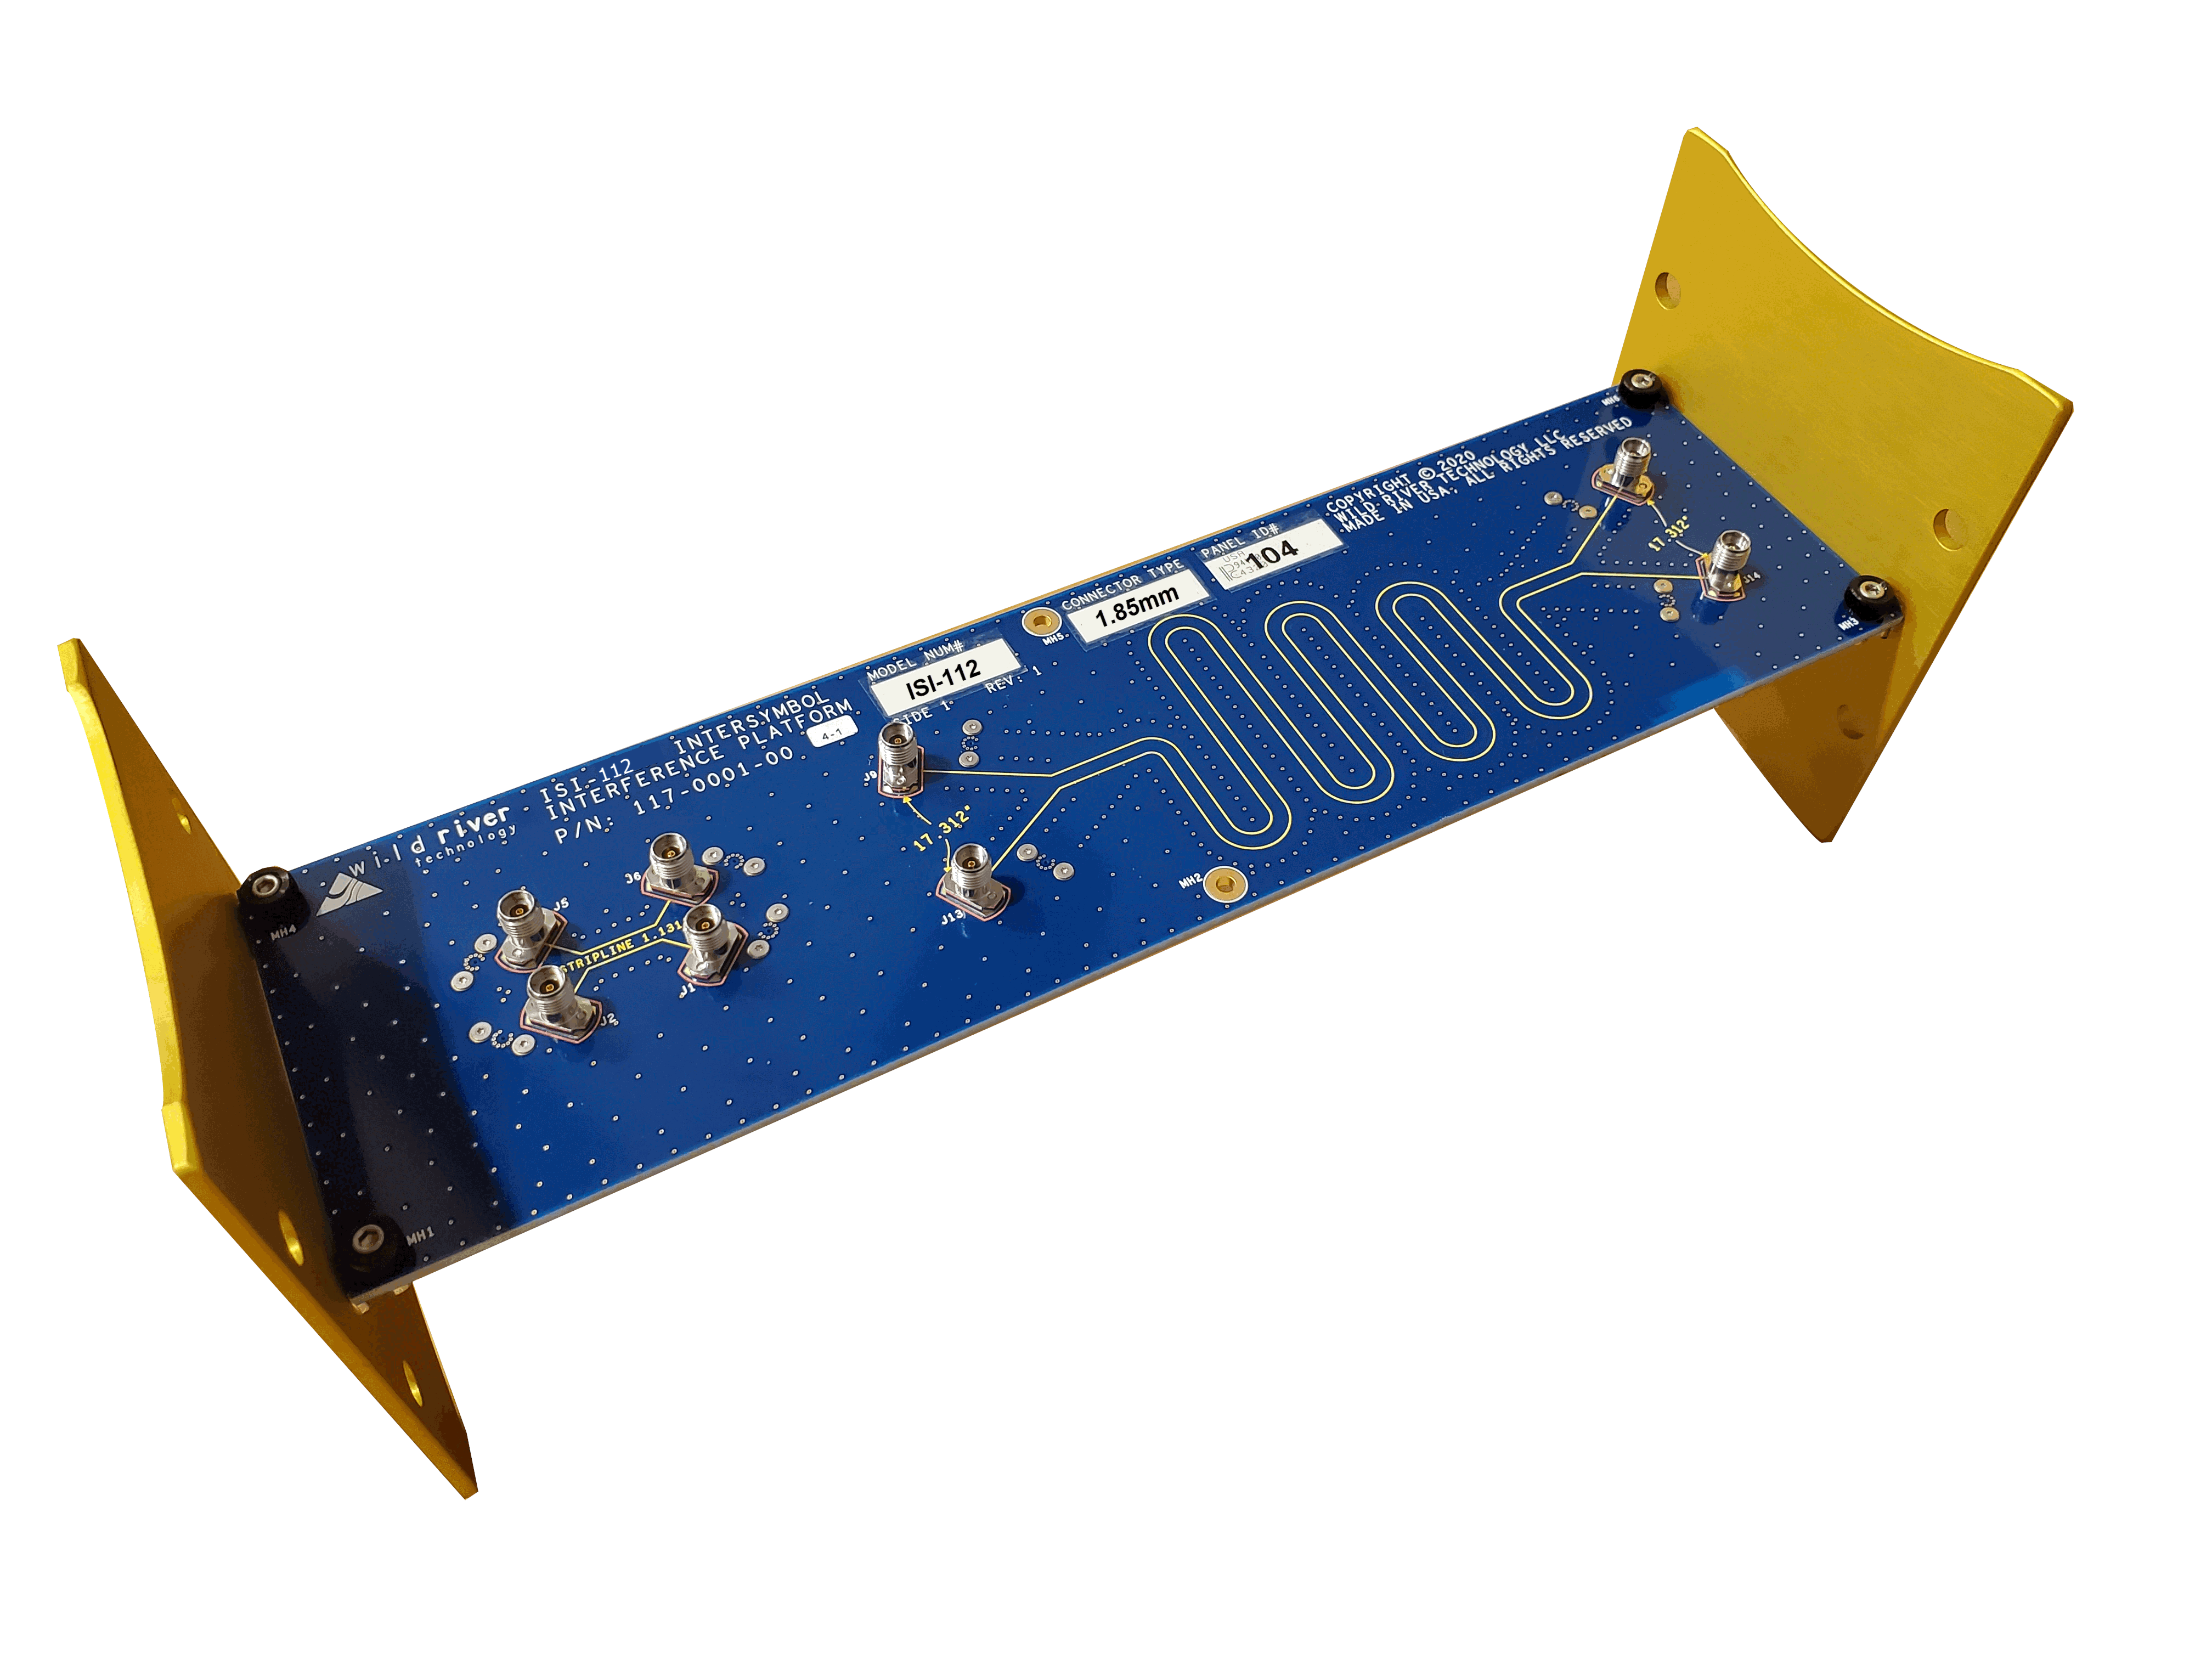 ISI-USB4 board set with case